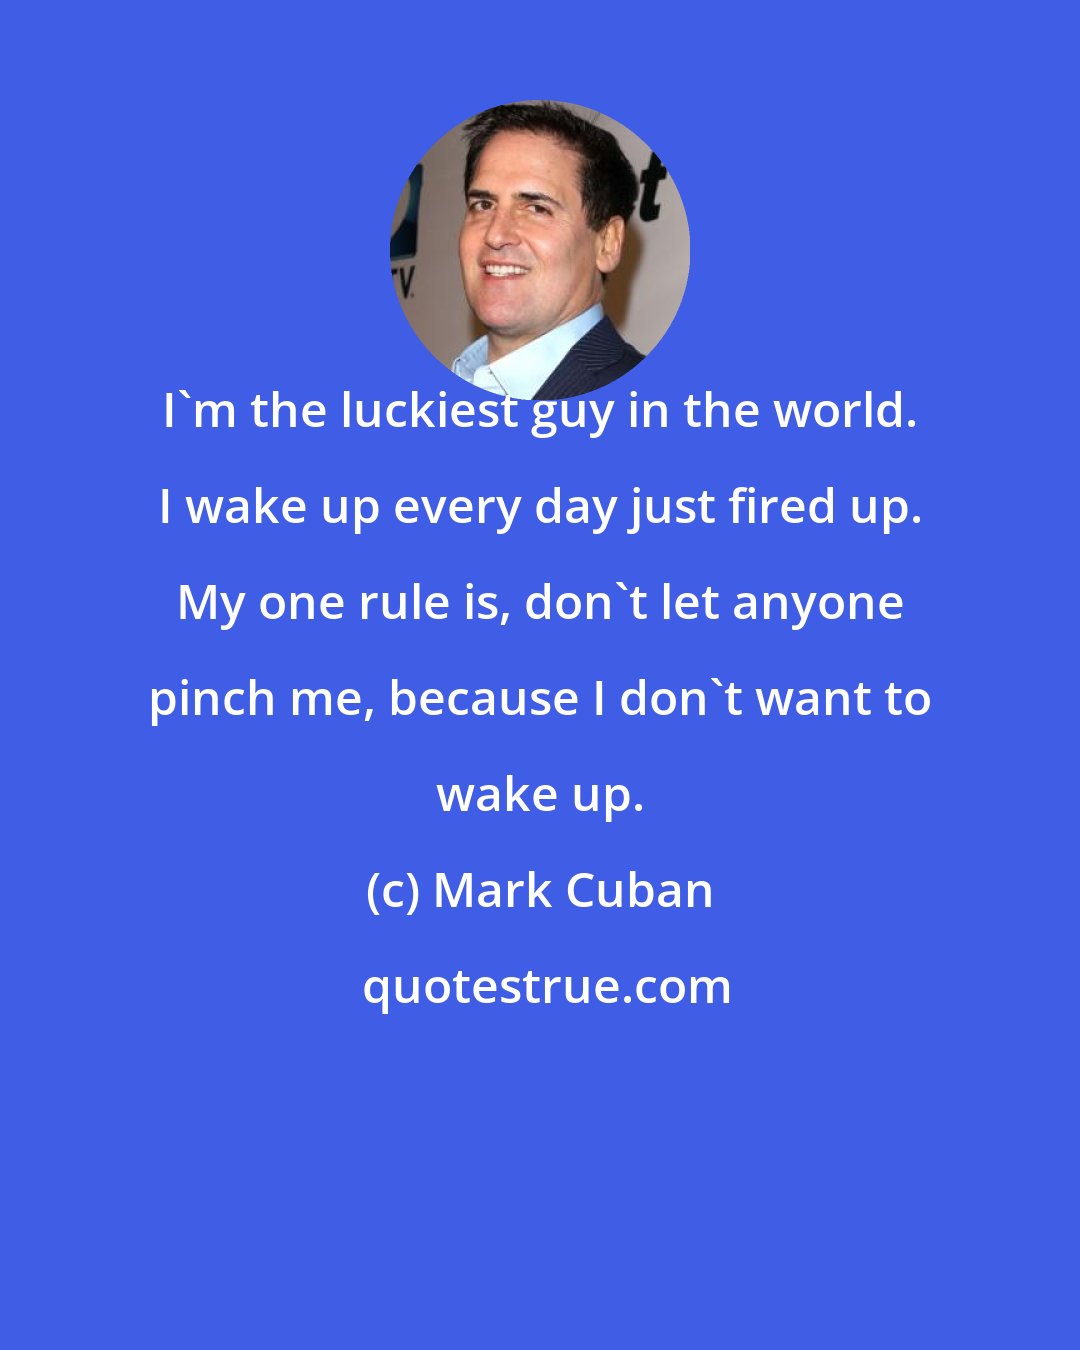 Mark Cuban: I'm the luckiest guy in the world. I wake up every day just fired up. My one rule is, don't let anyone pinch me, because I don't want to wake up.